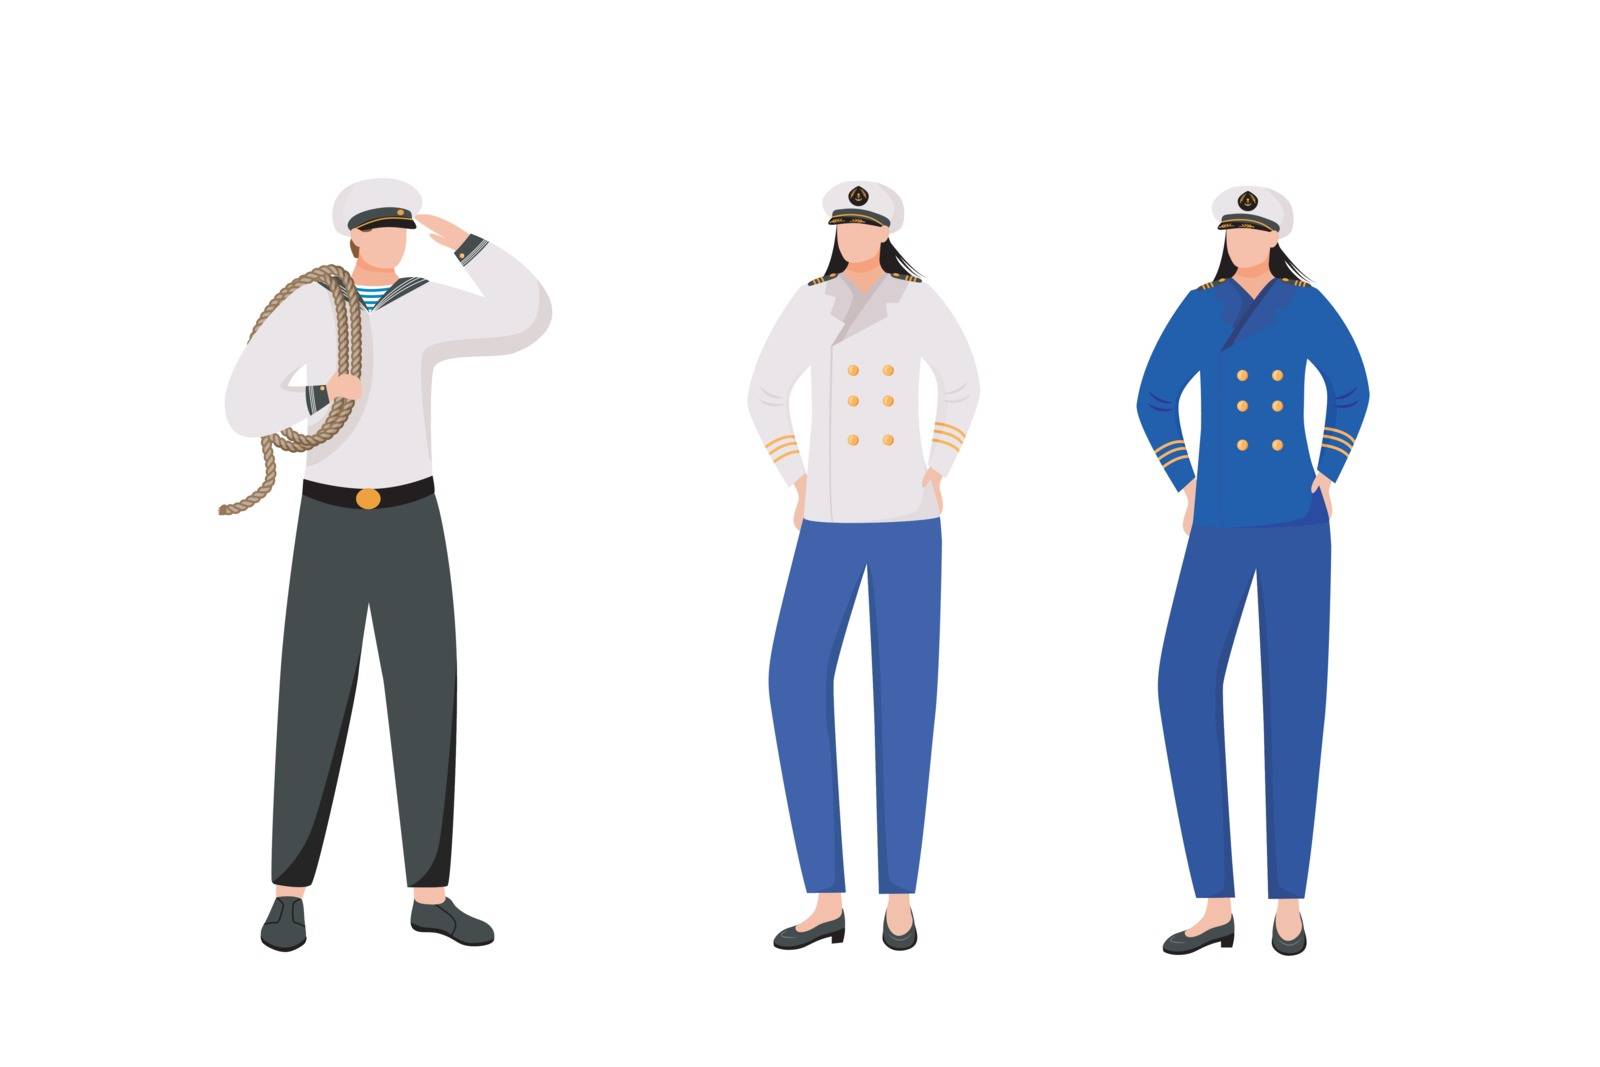 Maritime occupation flat vector illustration. Marine professions. Passenger fleet. Sailor and captains in work uniform isolated cartoon characters on white background